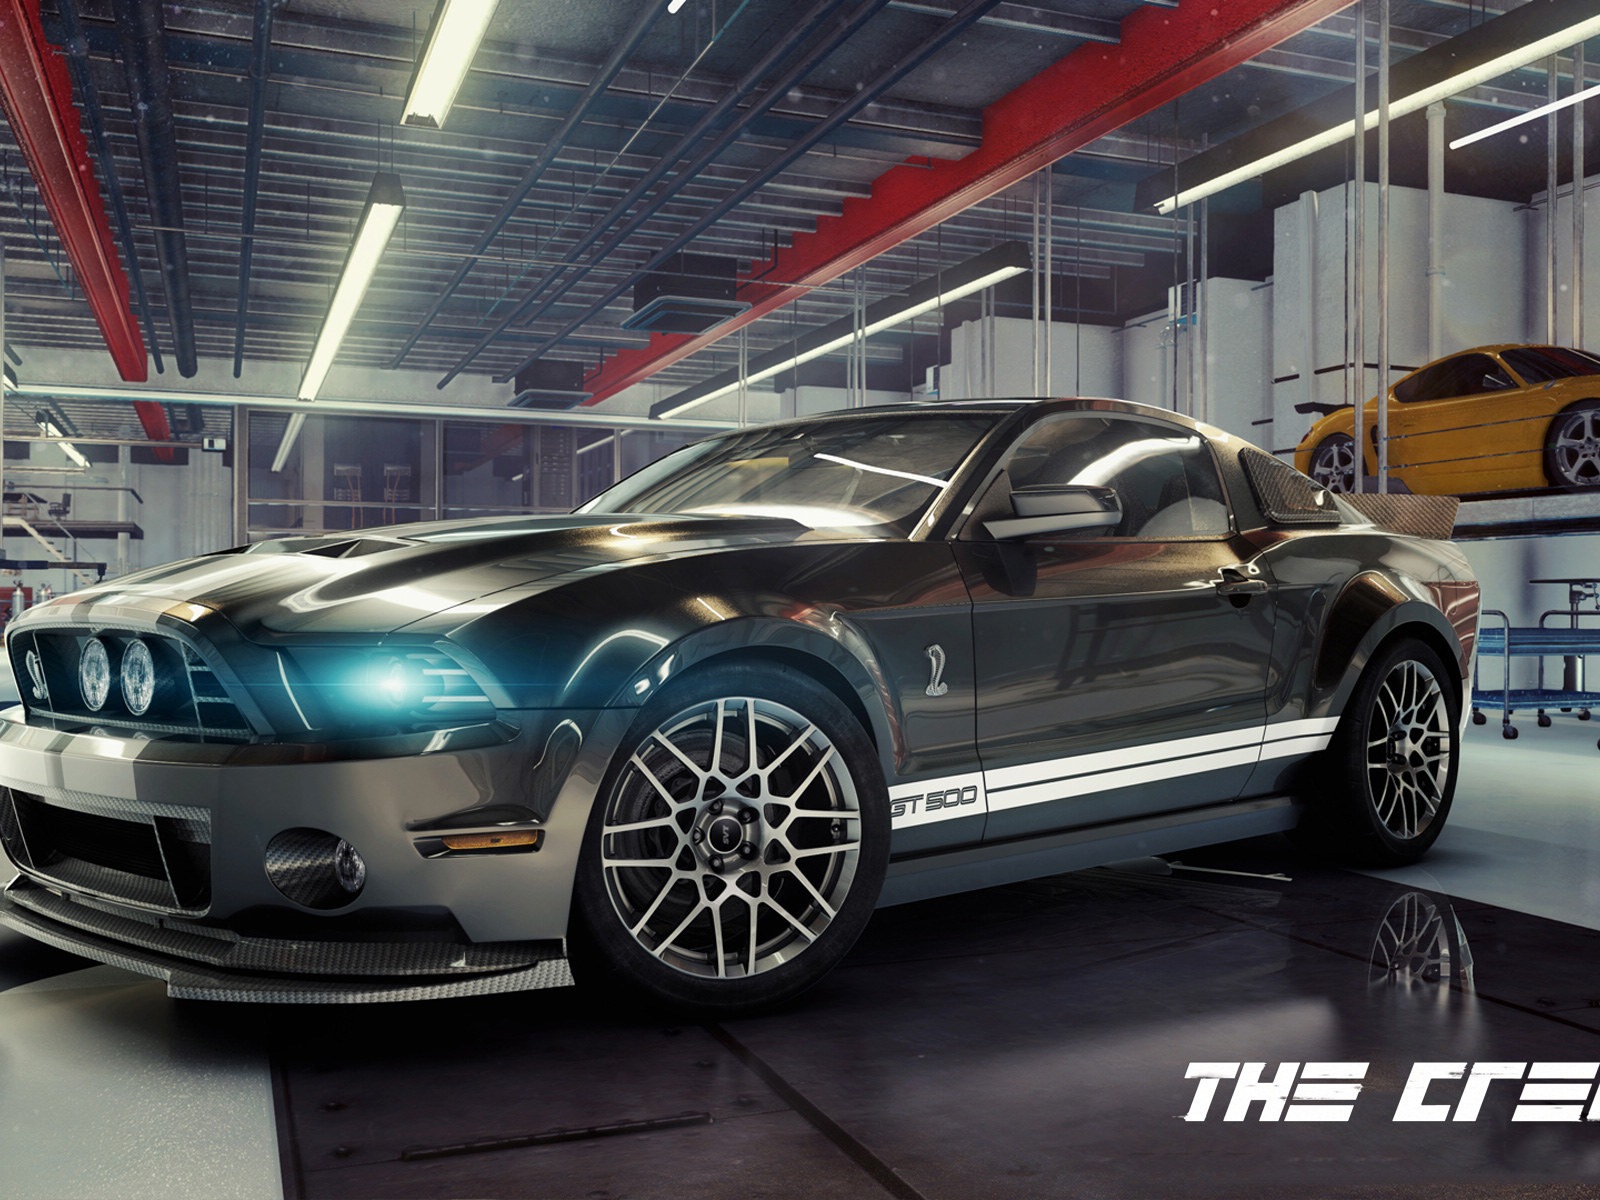 The Crew game HD wallpapers #11 - 1600x1200